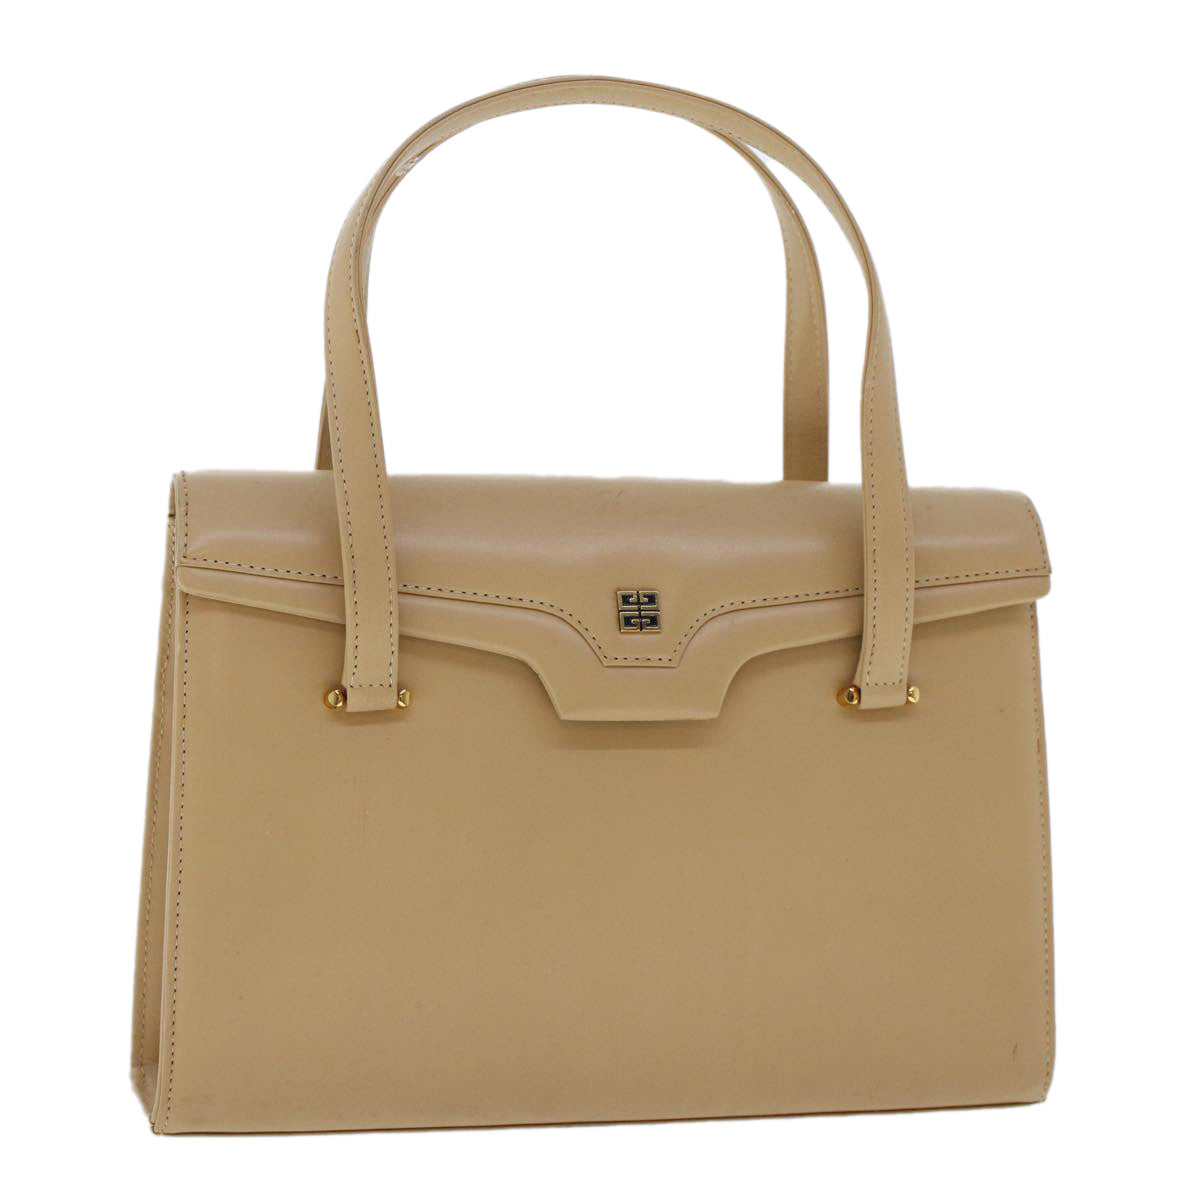 GIVENCHY Hand Bag Leather Beige Auth 48184